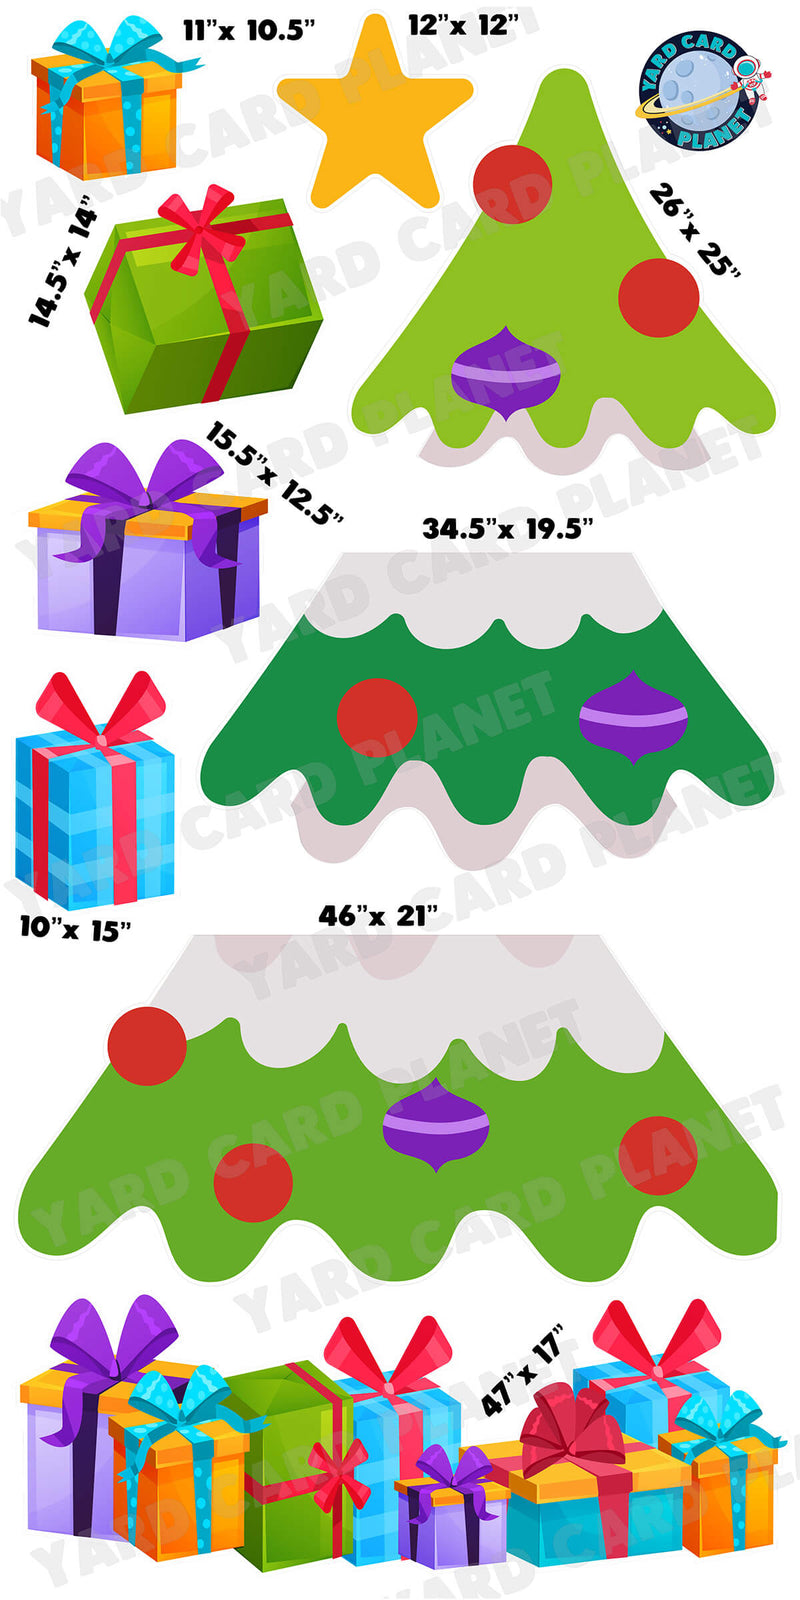 Big Colorful Christmas Tree EZ Quick Set and Gifts Yard Card Flair Set with Measurements